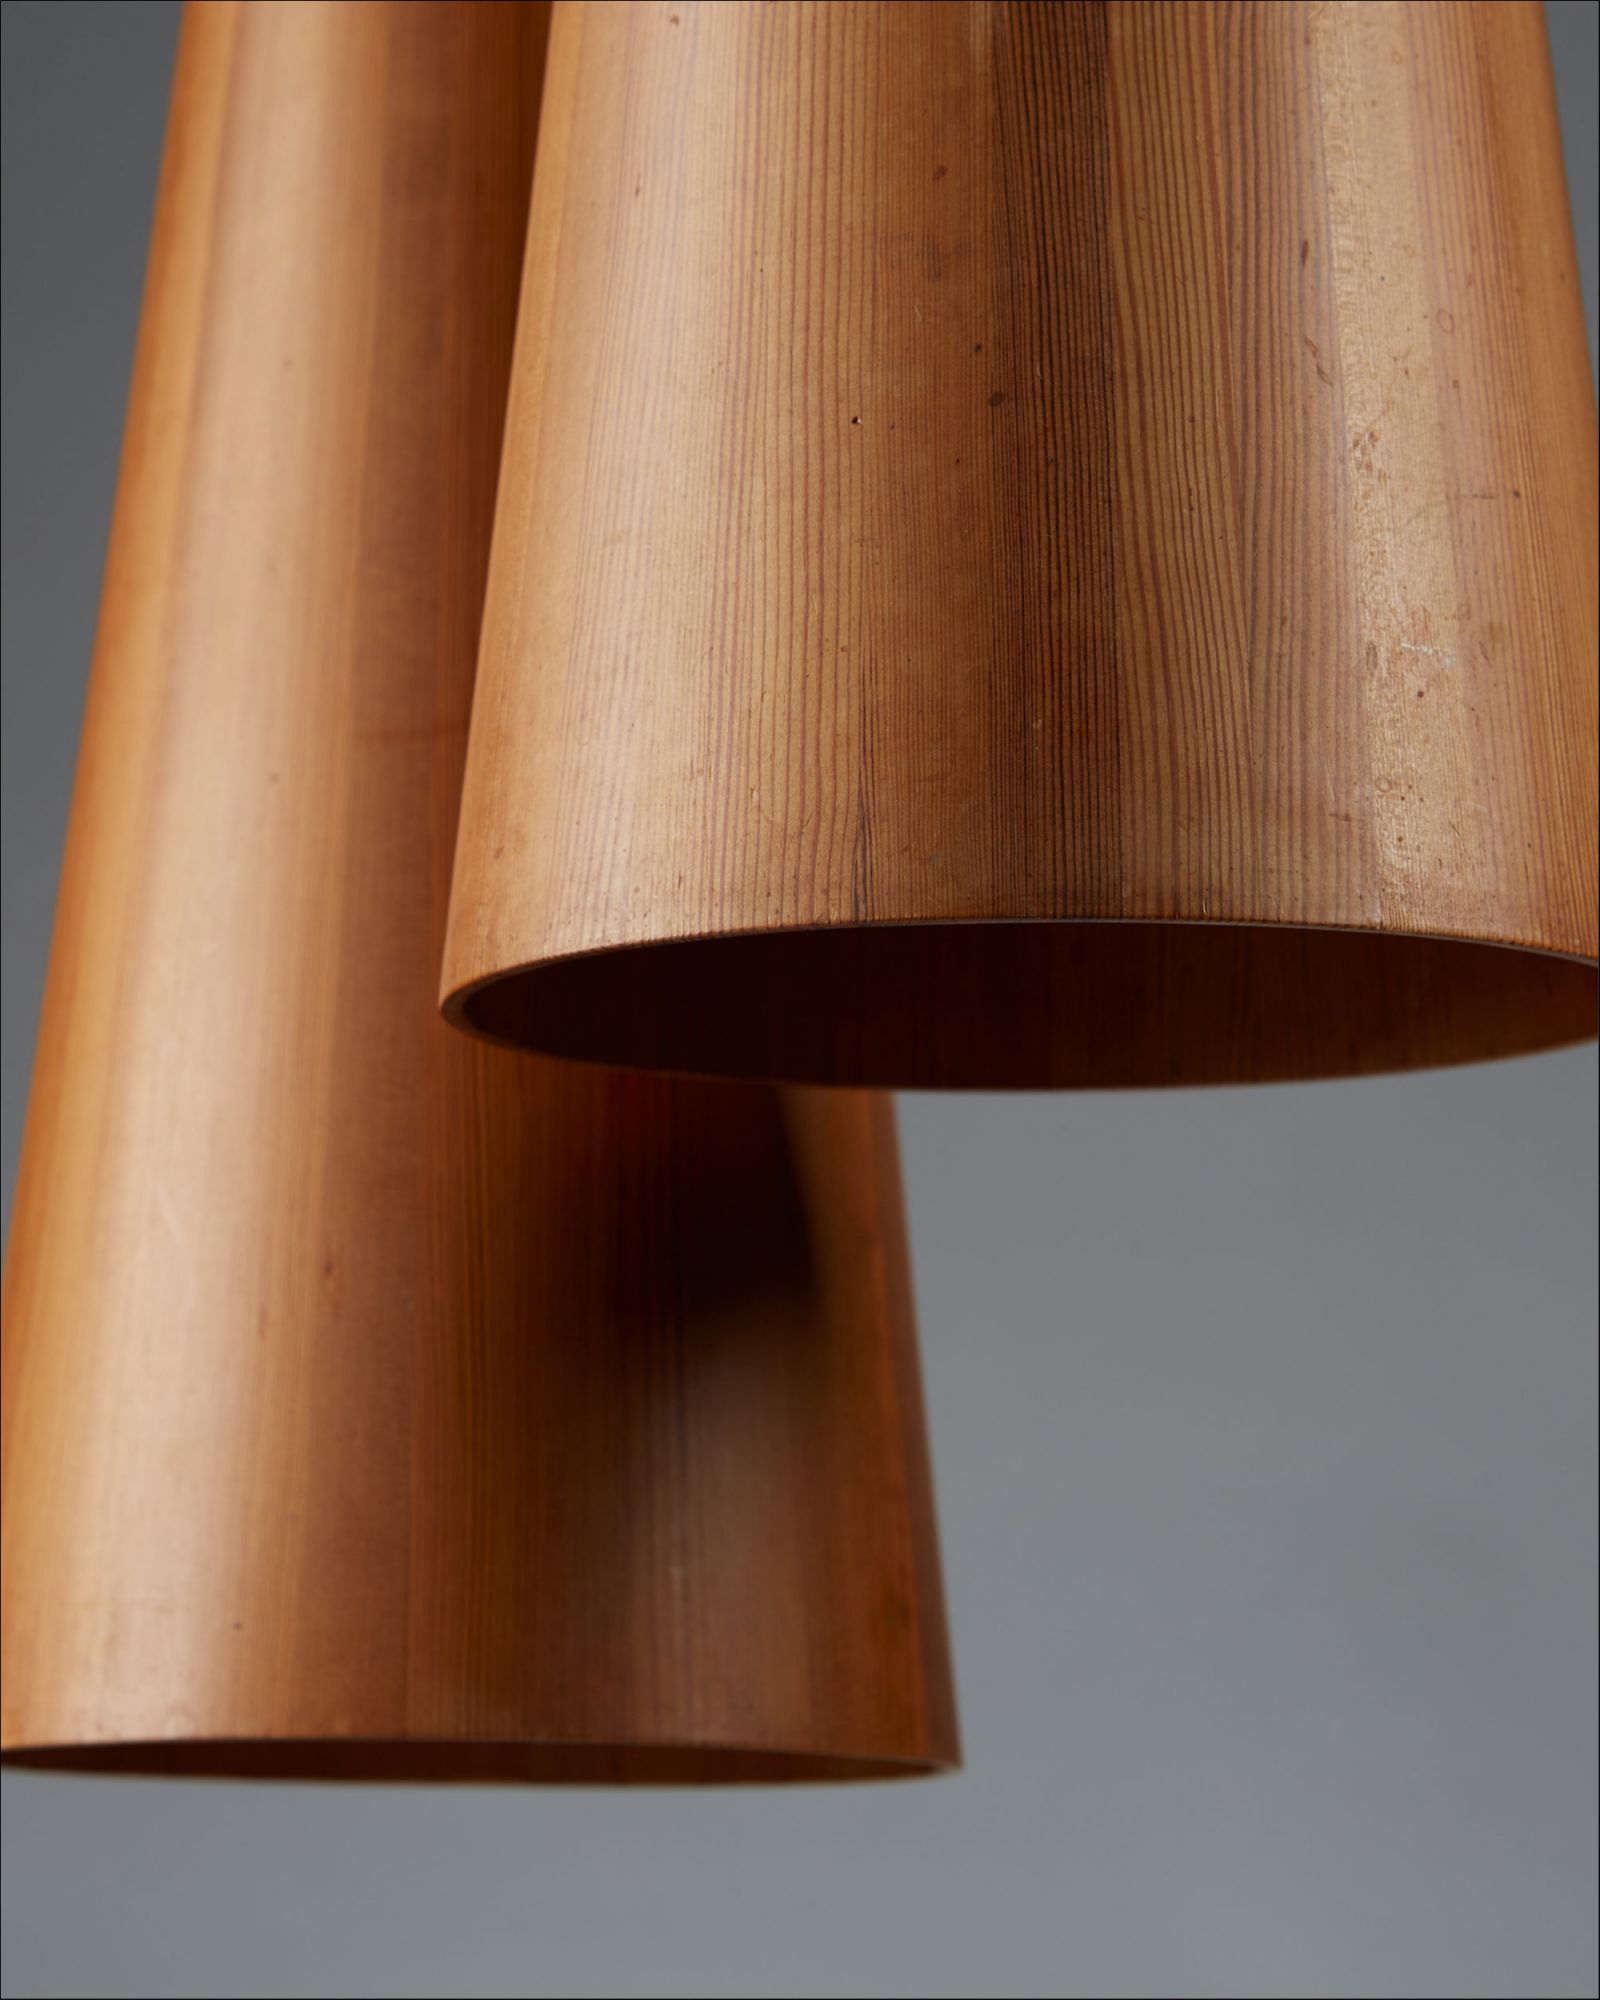 Accord Elemental Nybegynder Pair of ceiling lamps Jörgen Wolff for Christian A. Wolff Denmark 1950's